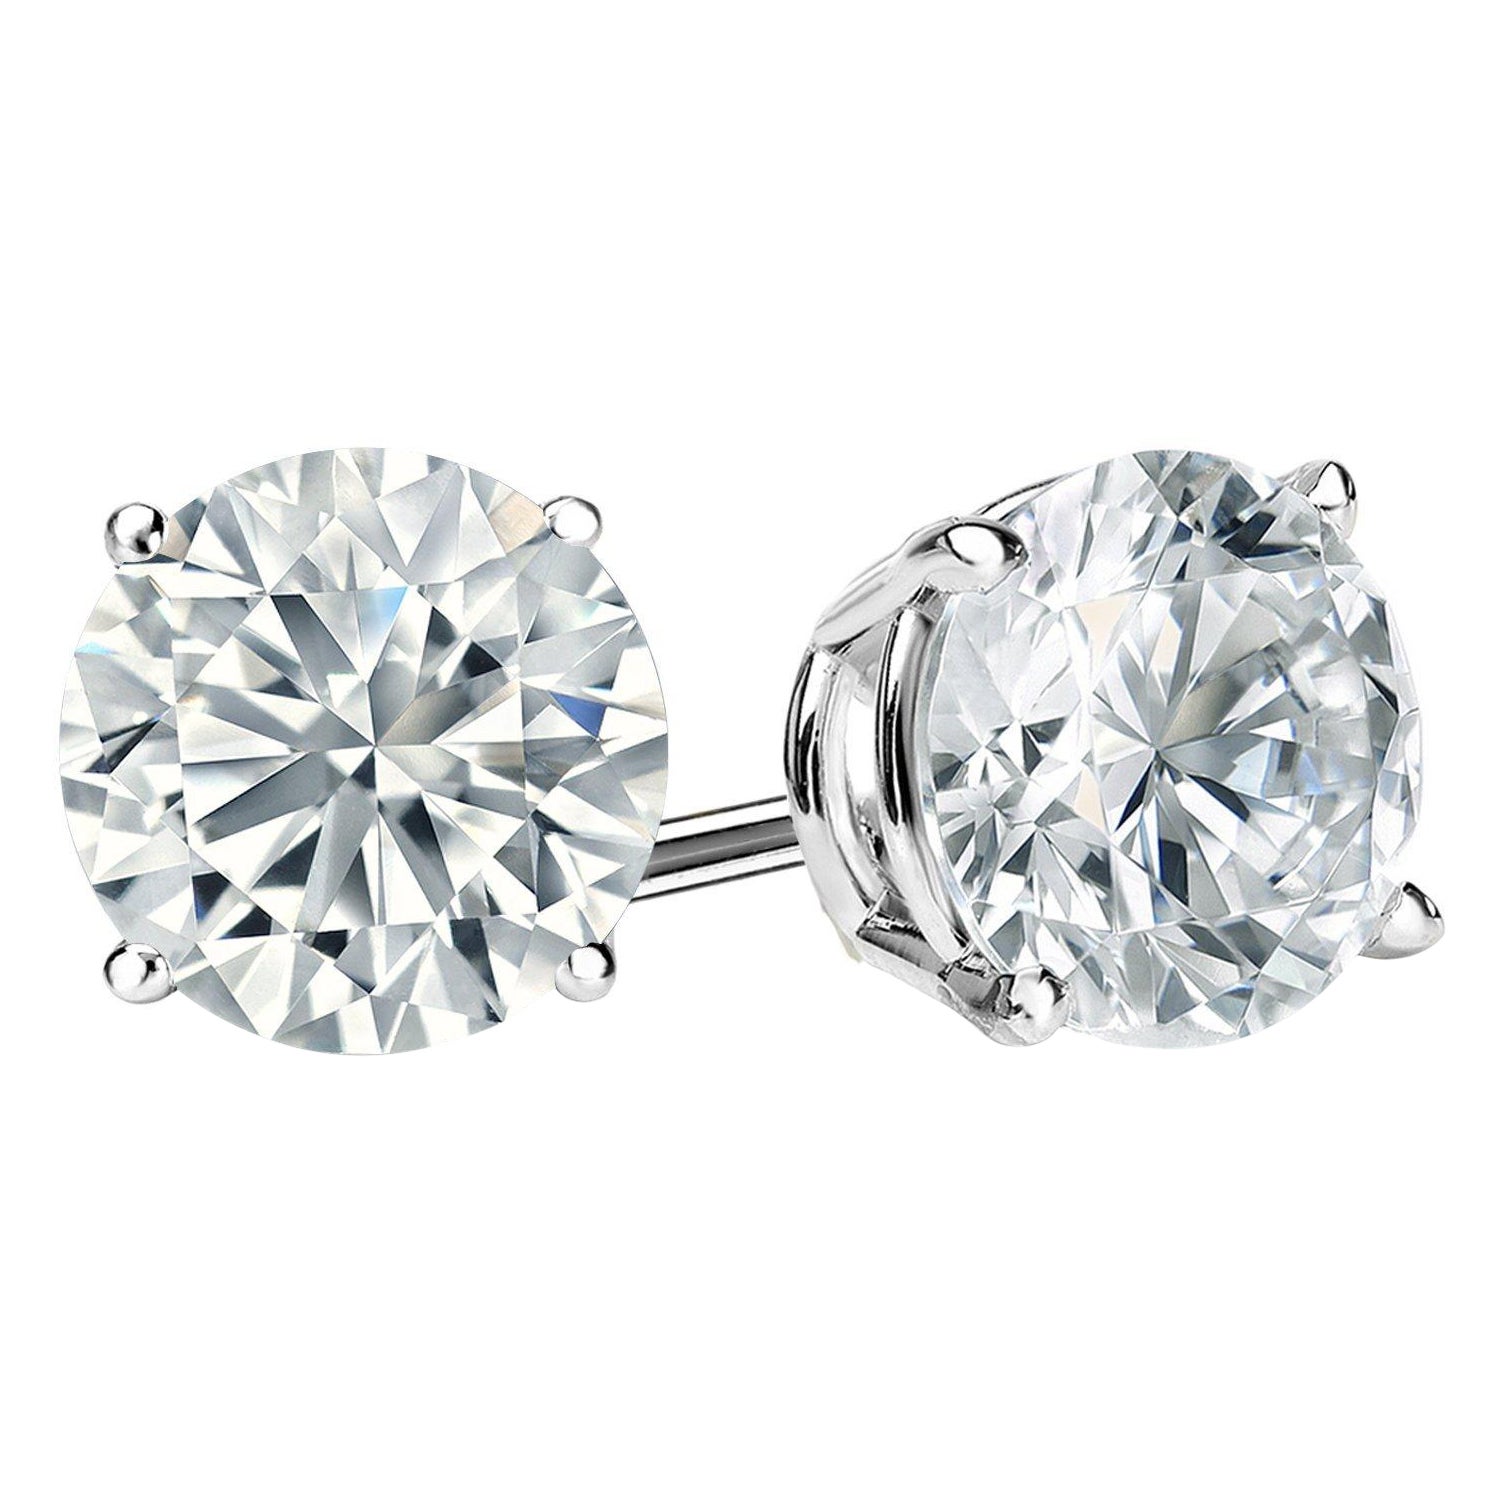 Beauvince GIA ISI1 Certified 2.01 Carat Round Diamond Studs